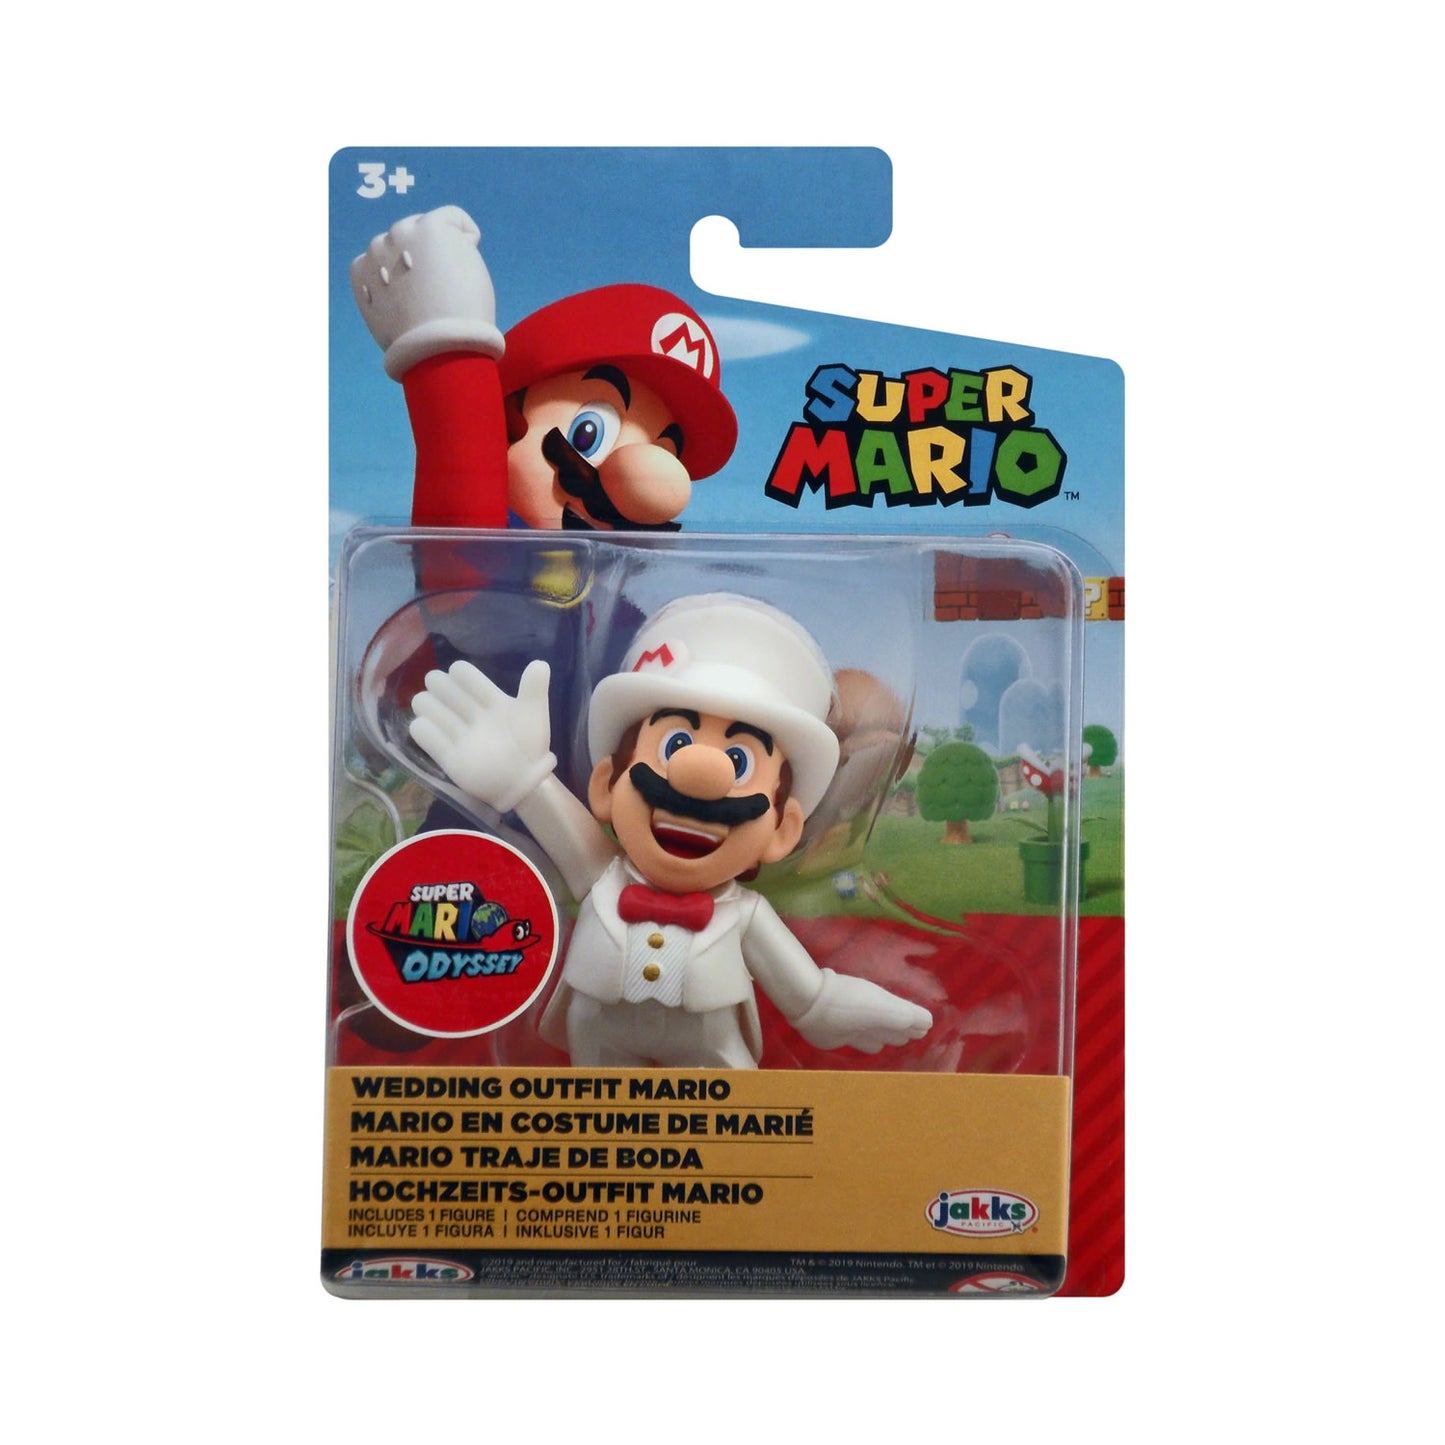 Wedding Outfit Mario 2.5-Inch Figure from Super Mario Wave 20